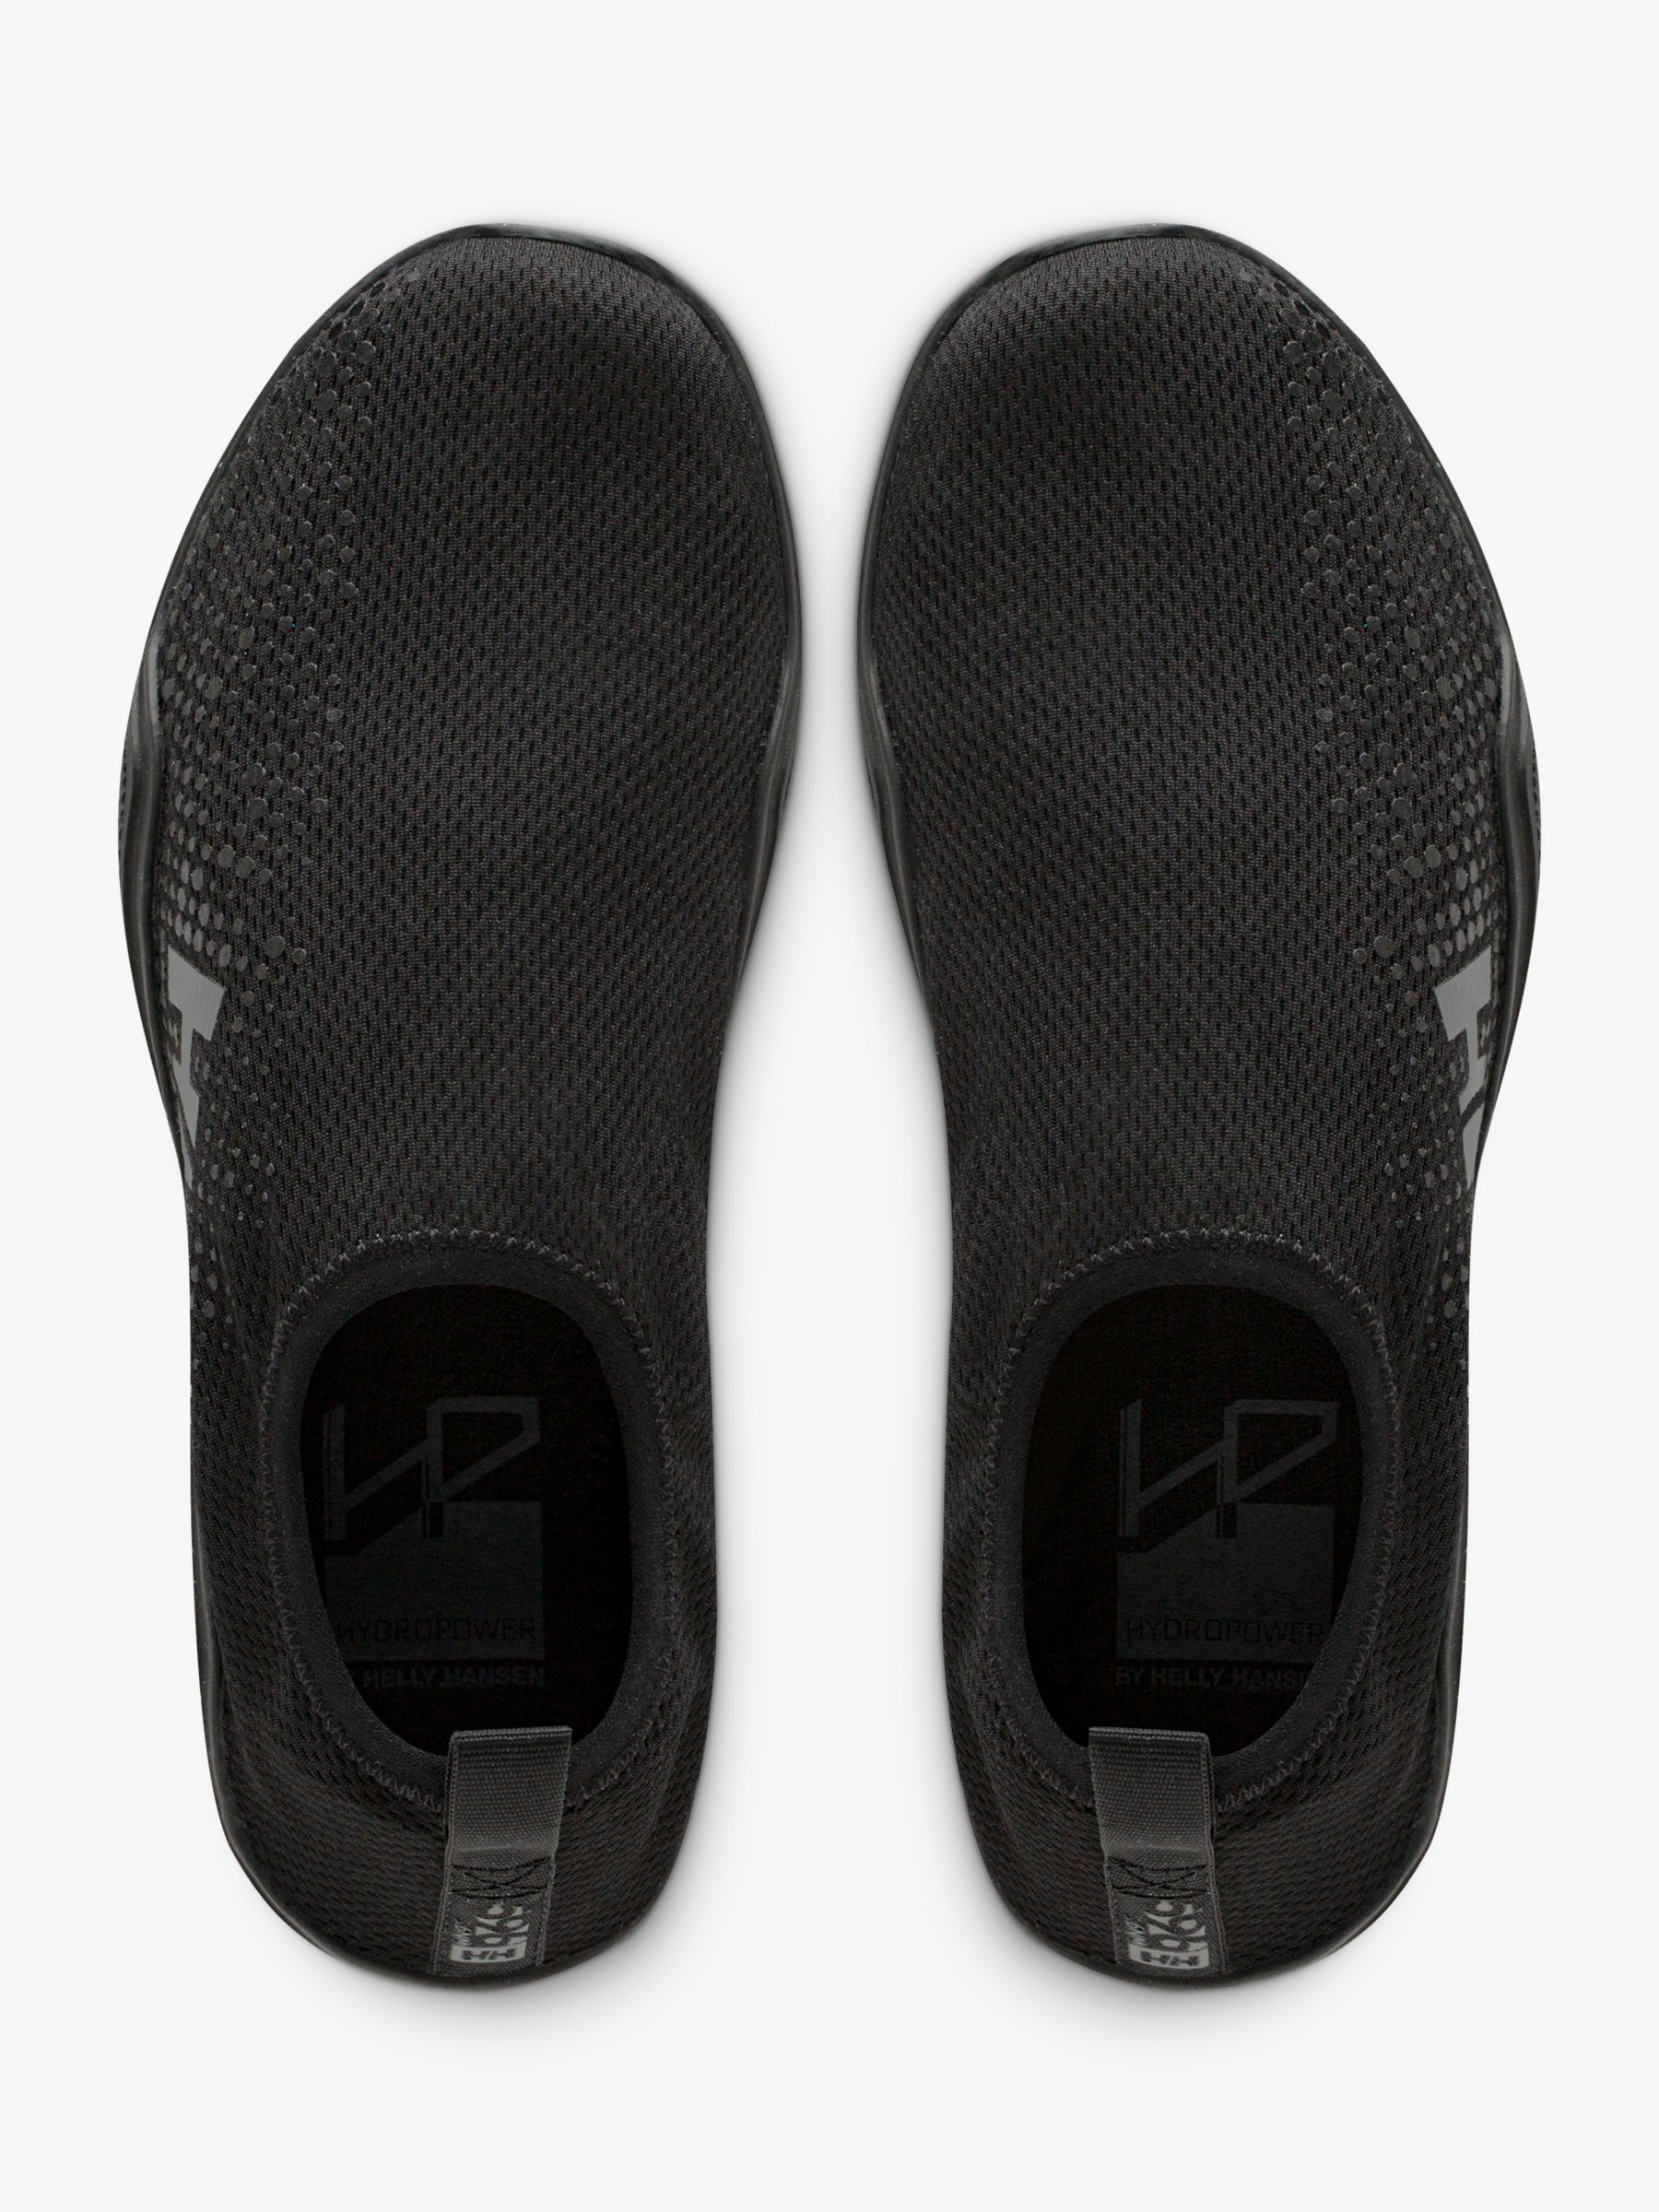 Buy Helly Hansen Crest Watermoc Women's Water Shoes, Black/Charcoal Online at johnlewis.com